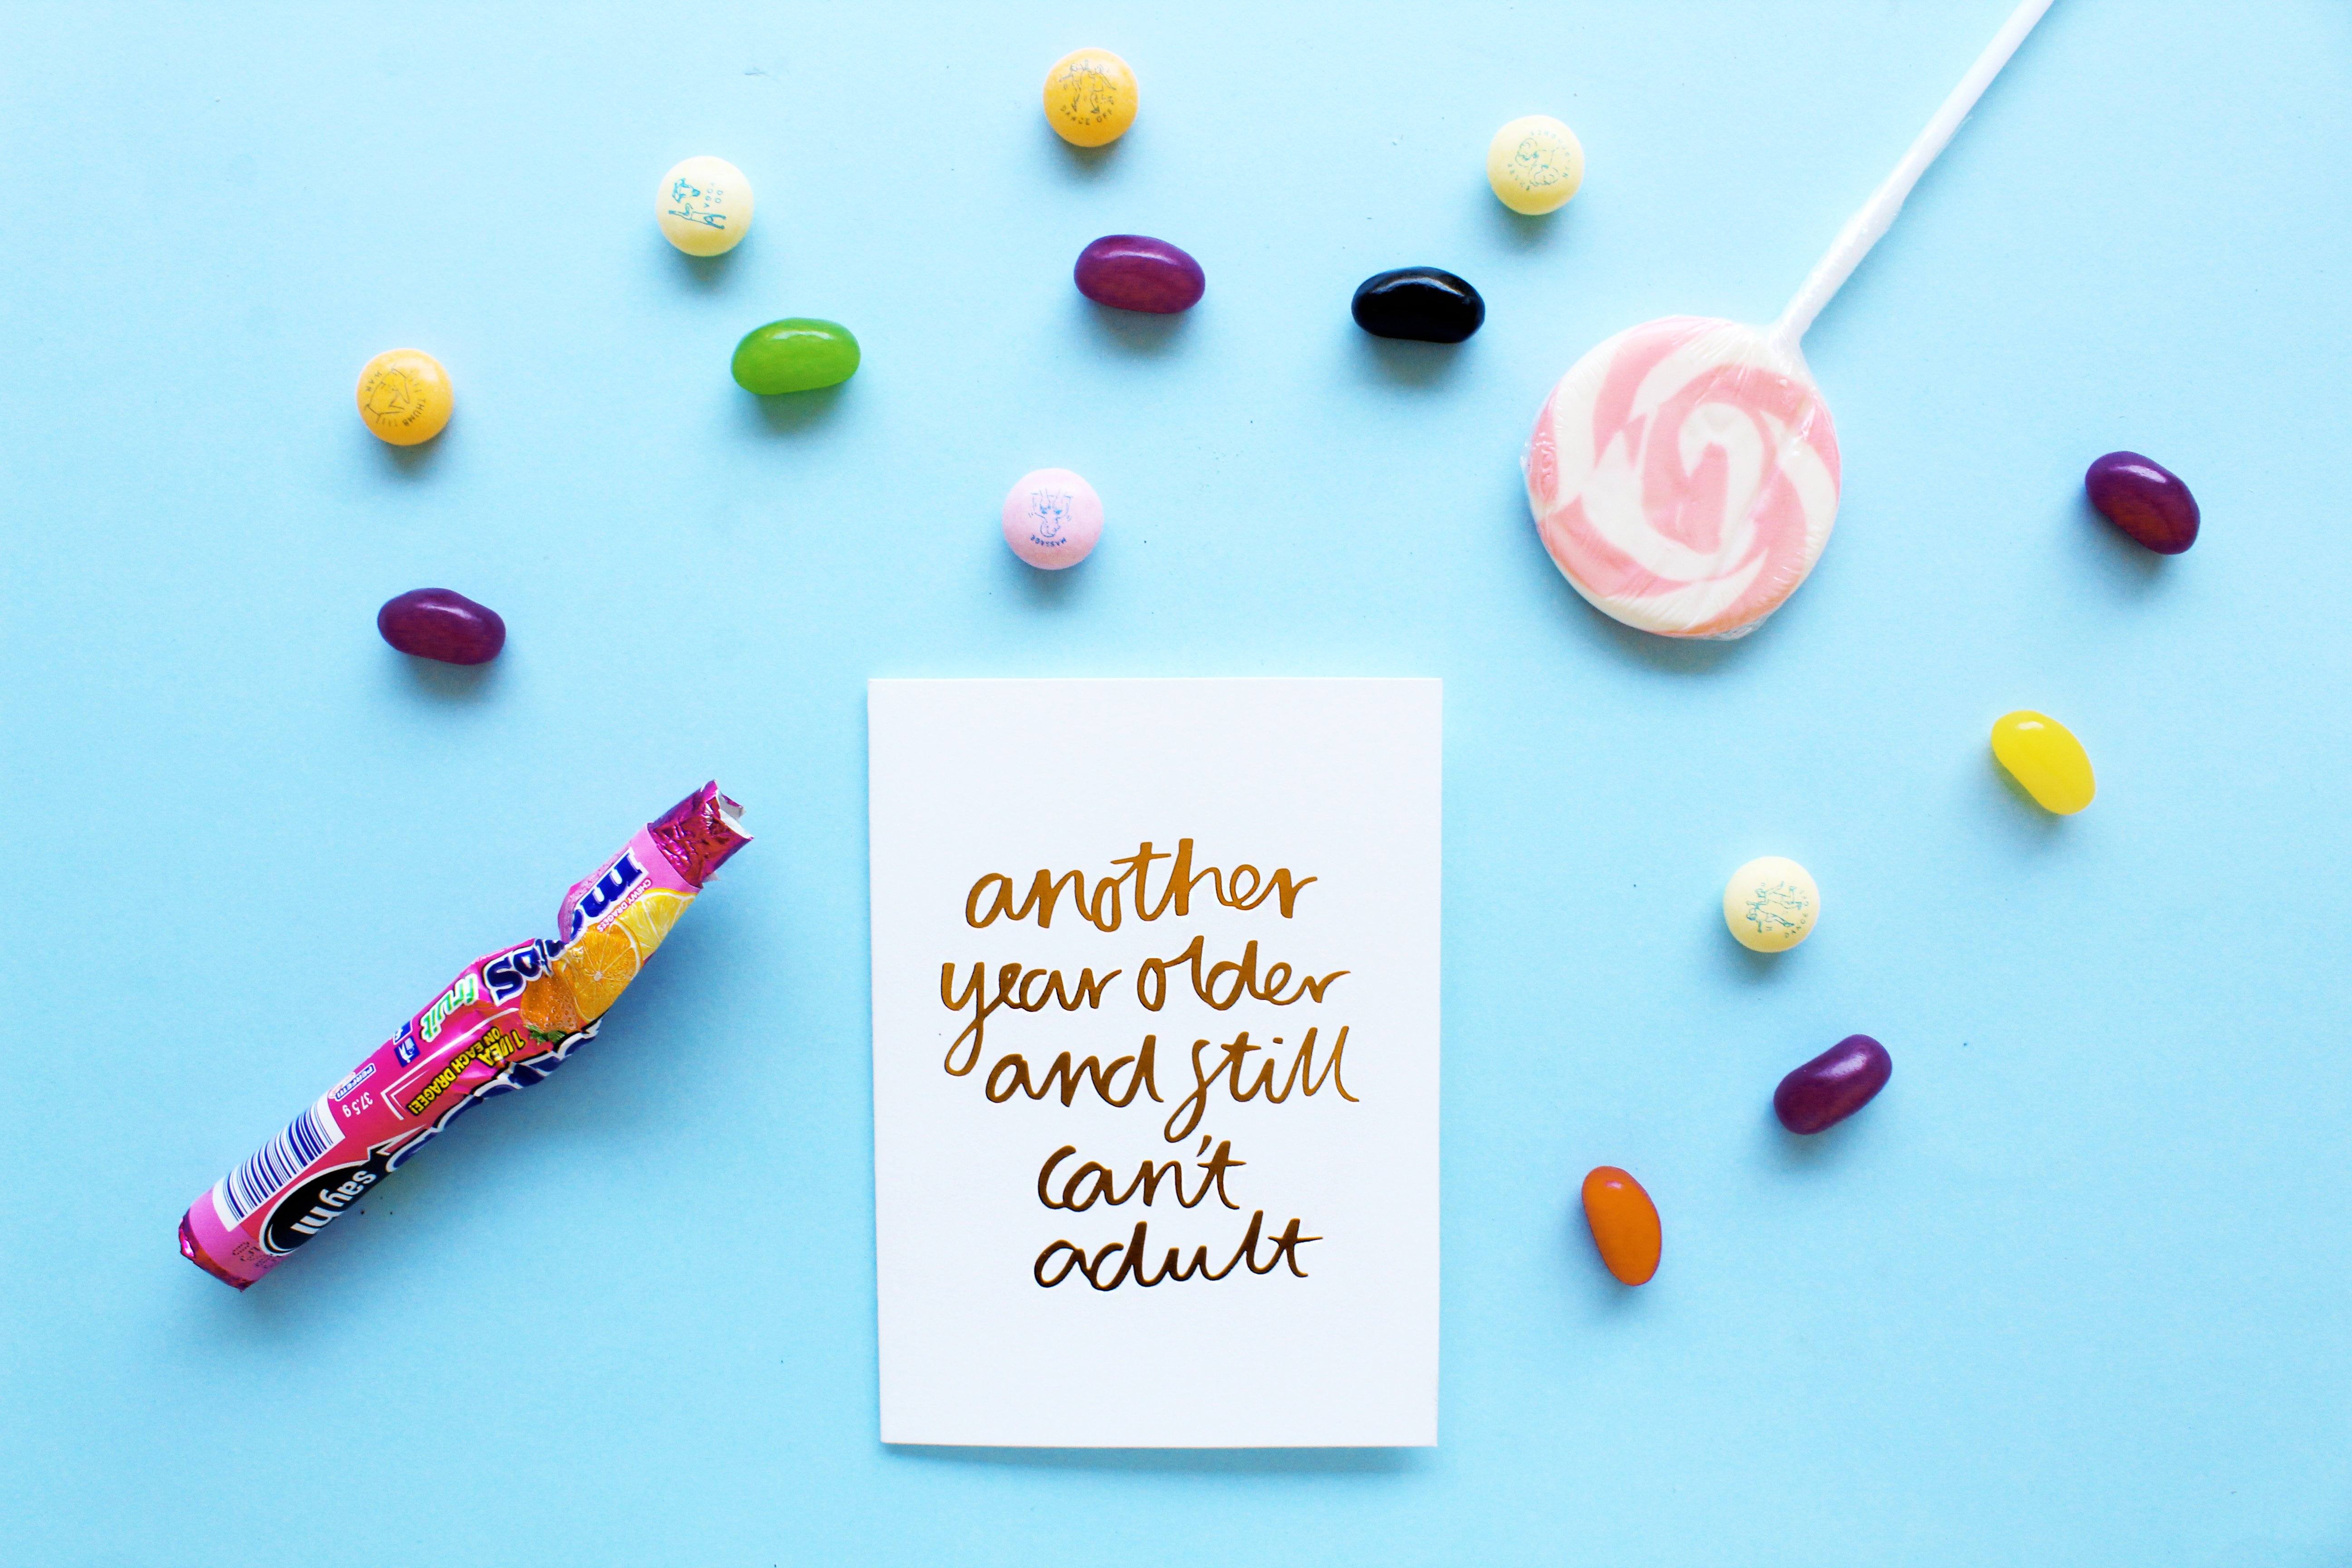 Still Can't Adult foiled greeting card | Blushing Confetti